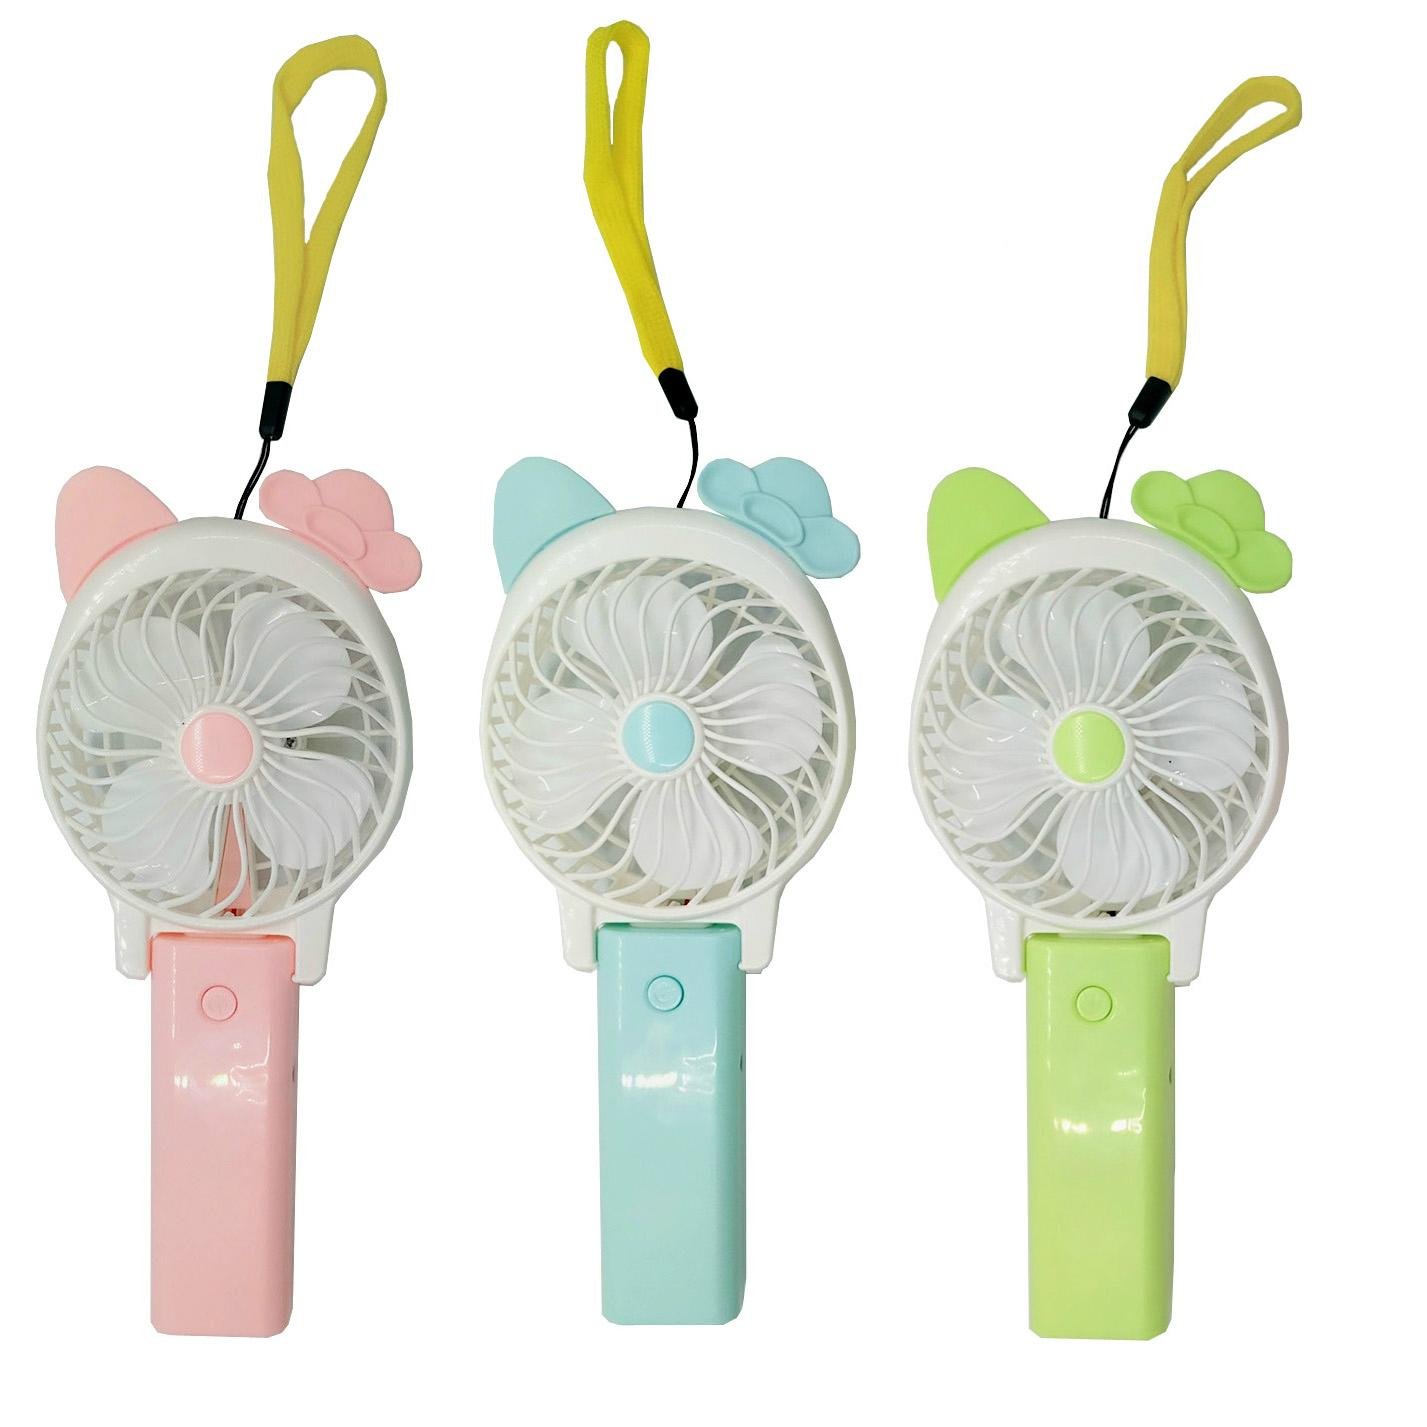 Rabbit Ear Portable Rechargeable Air Cooling Mini Hand Fan 3